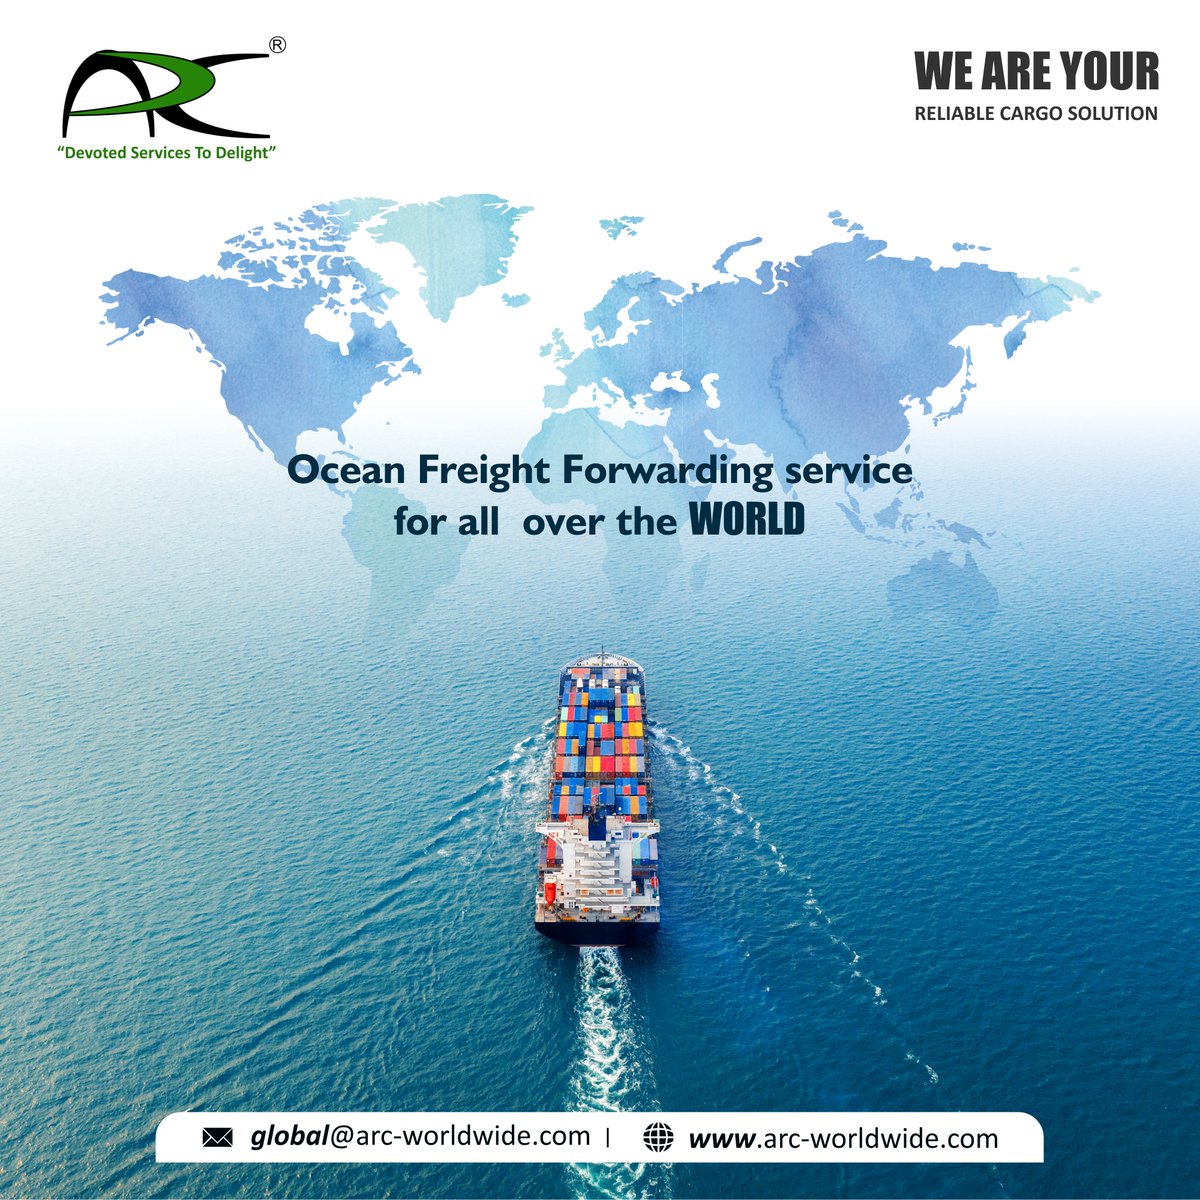 ☑We Provide Fast and Time Efficient Shipping & Logistics Services in all over the world

🌎arc-worldwide.com

#airfreight #seafreight #logistics #cargo #shipping #oceanfreight #freightforwarding #like #freight #export #import #customsclearance #worldwide #freightforwarder